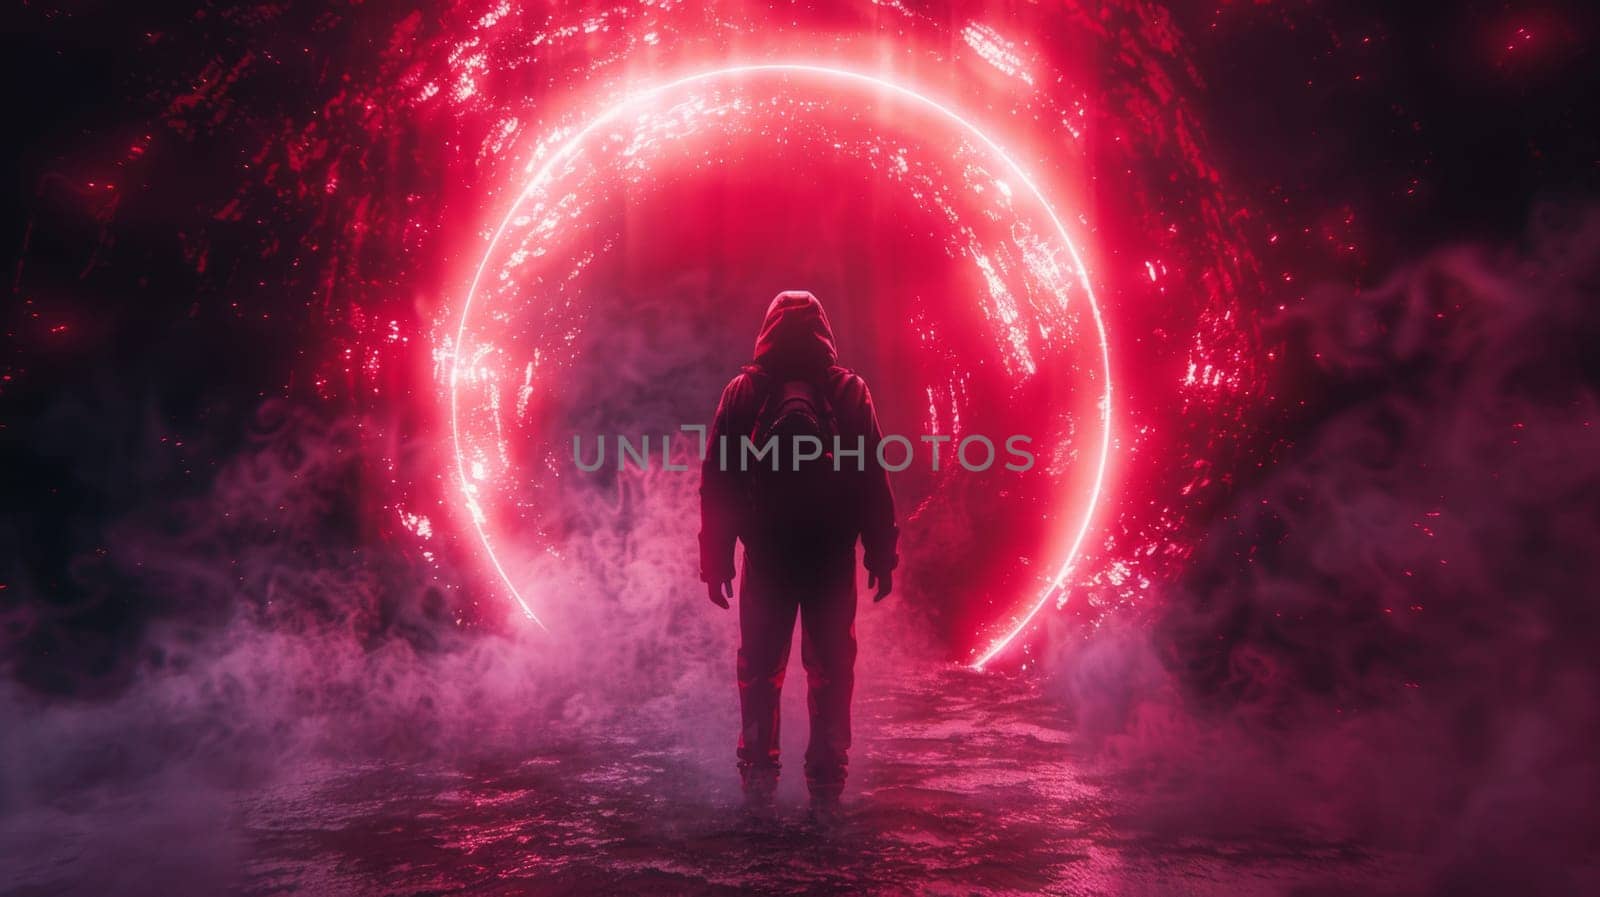 A person standing in front of a red glowing tunnel